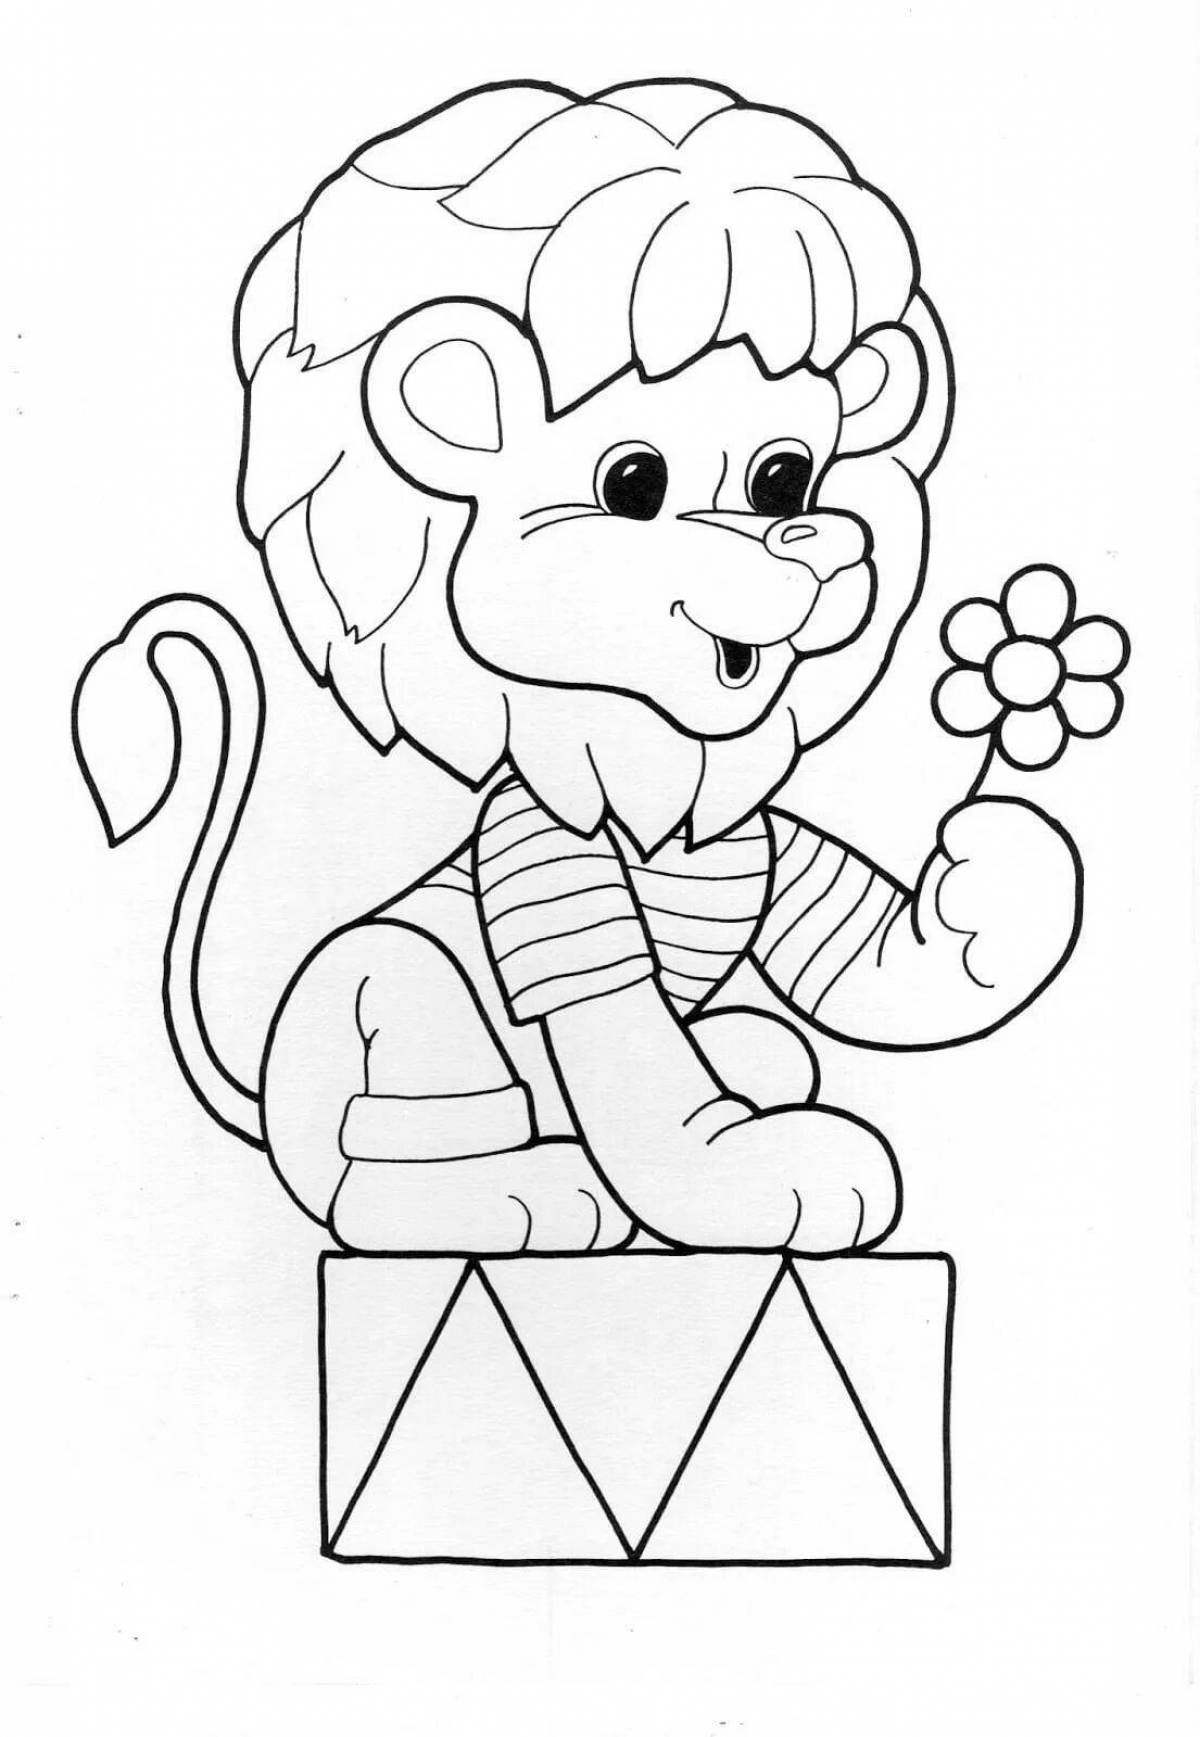 Wonderful circus coloring book for 6-7 year olds